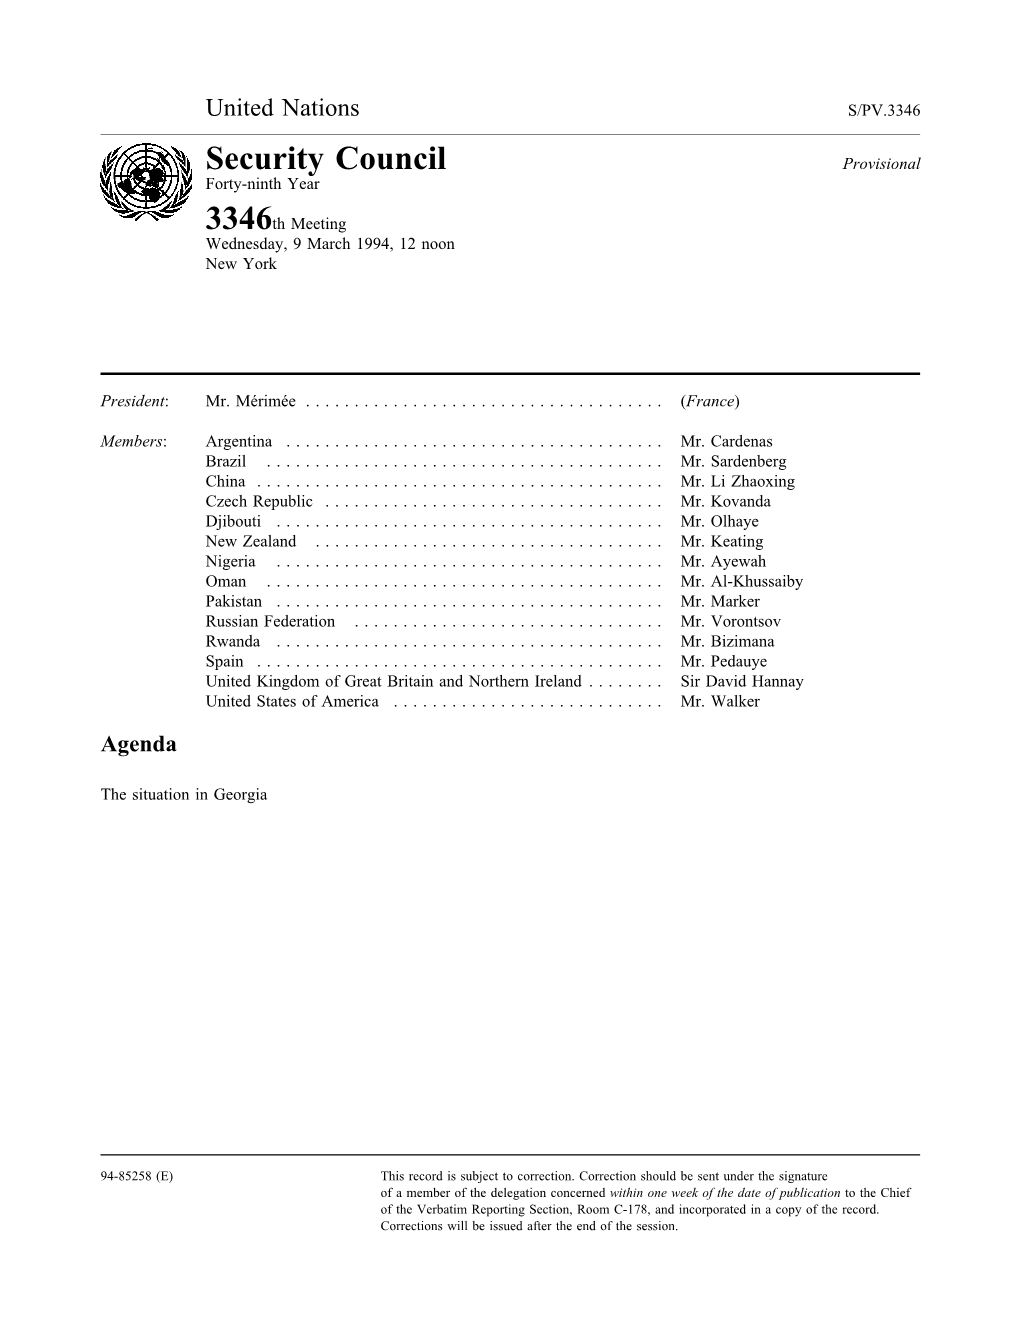 Security Council Provisional Forty-Ninth Year